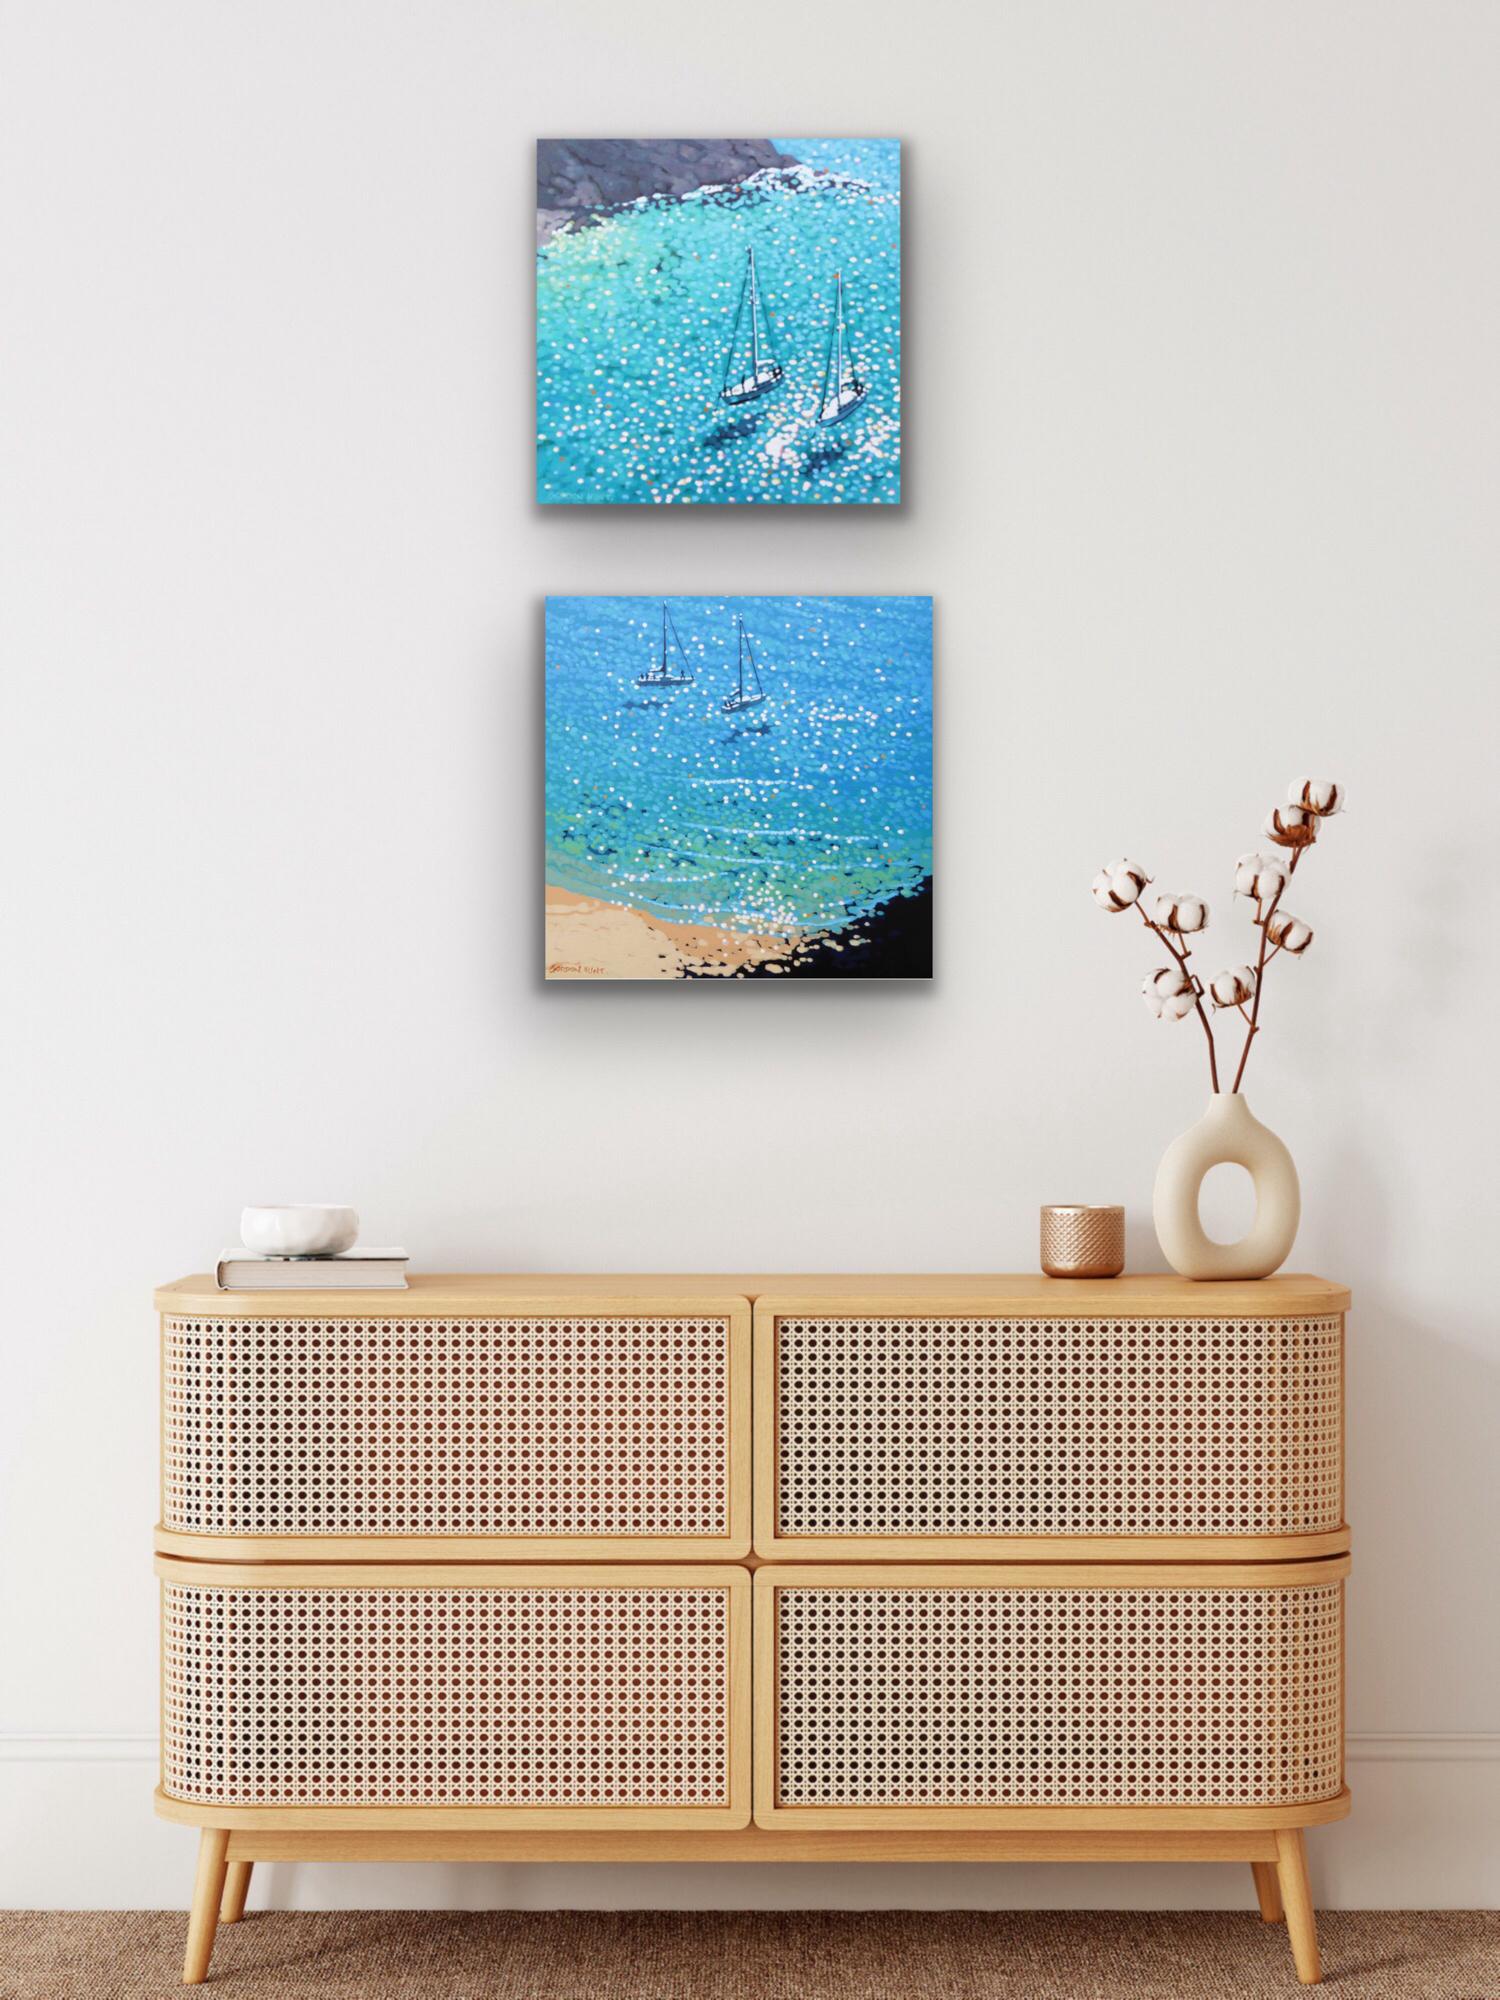 Anchored Up and Turquoise bay– small By Gordon Hunt [2019] Seascape - Landscape 